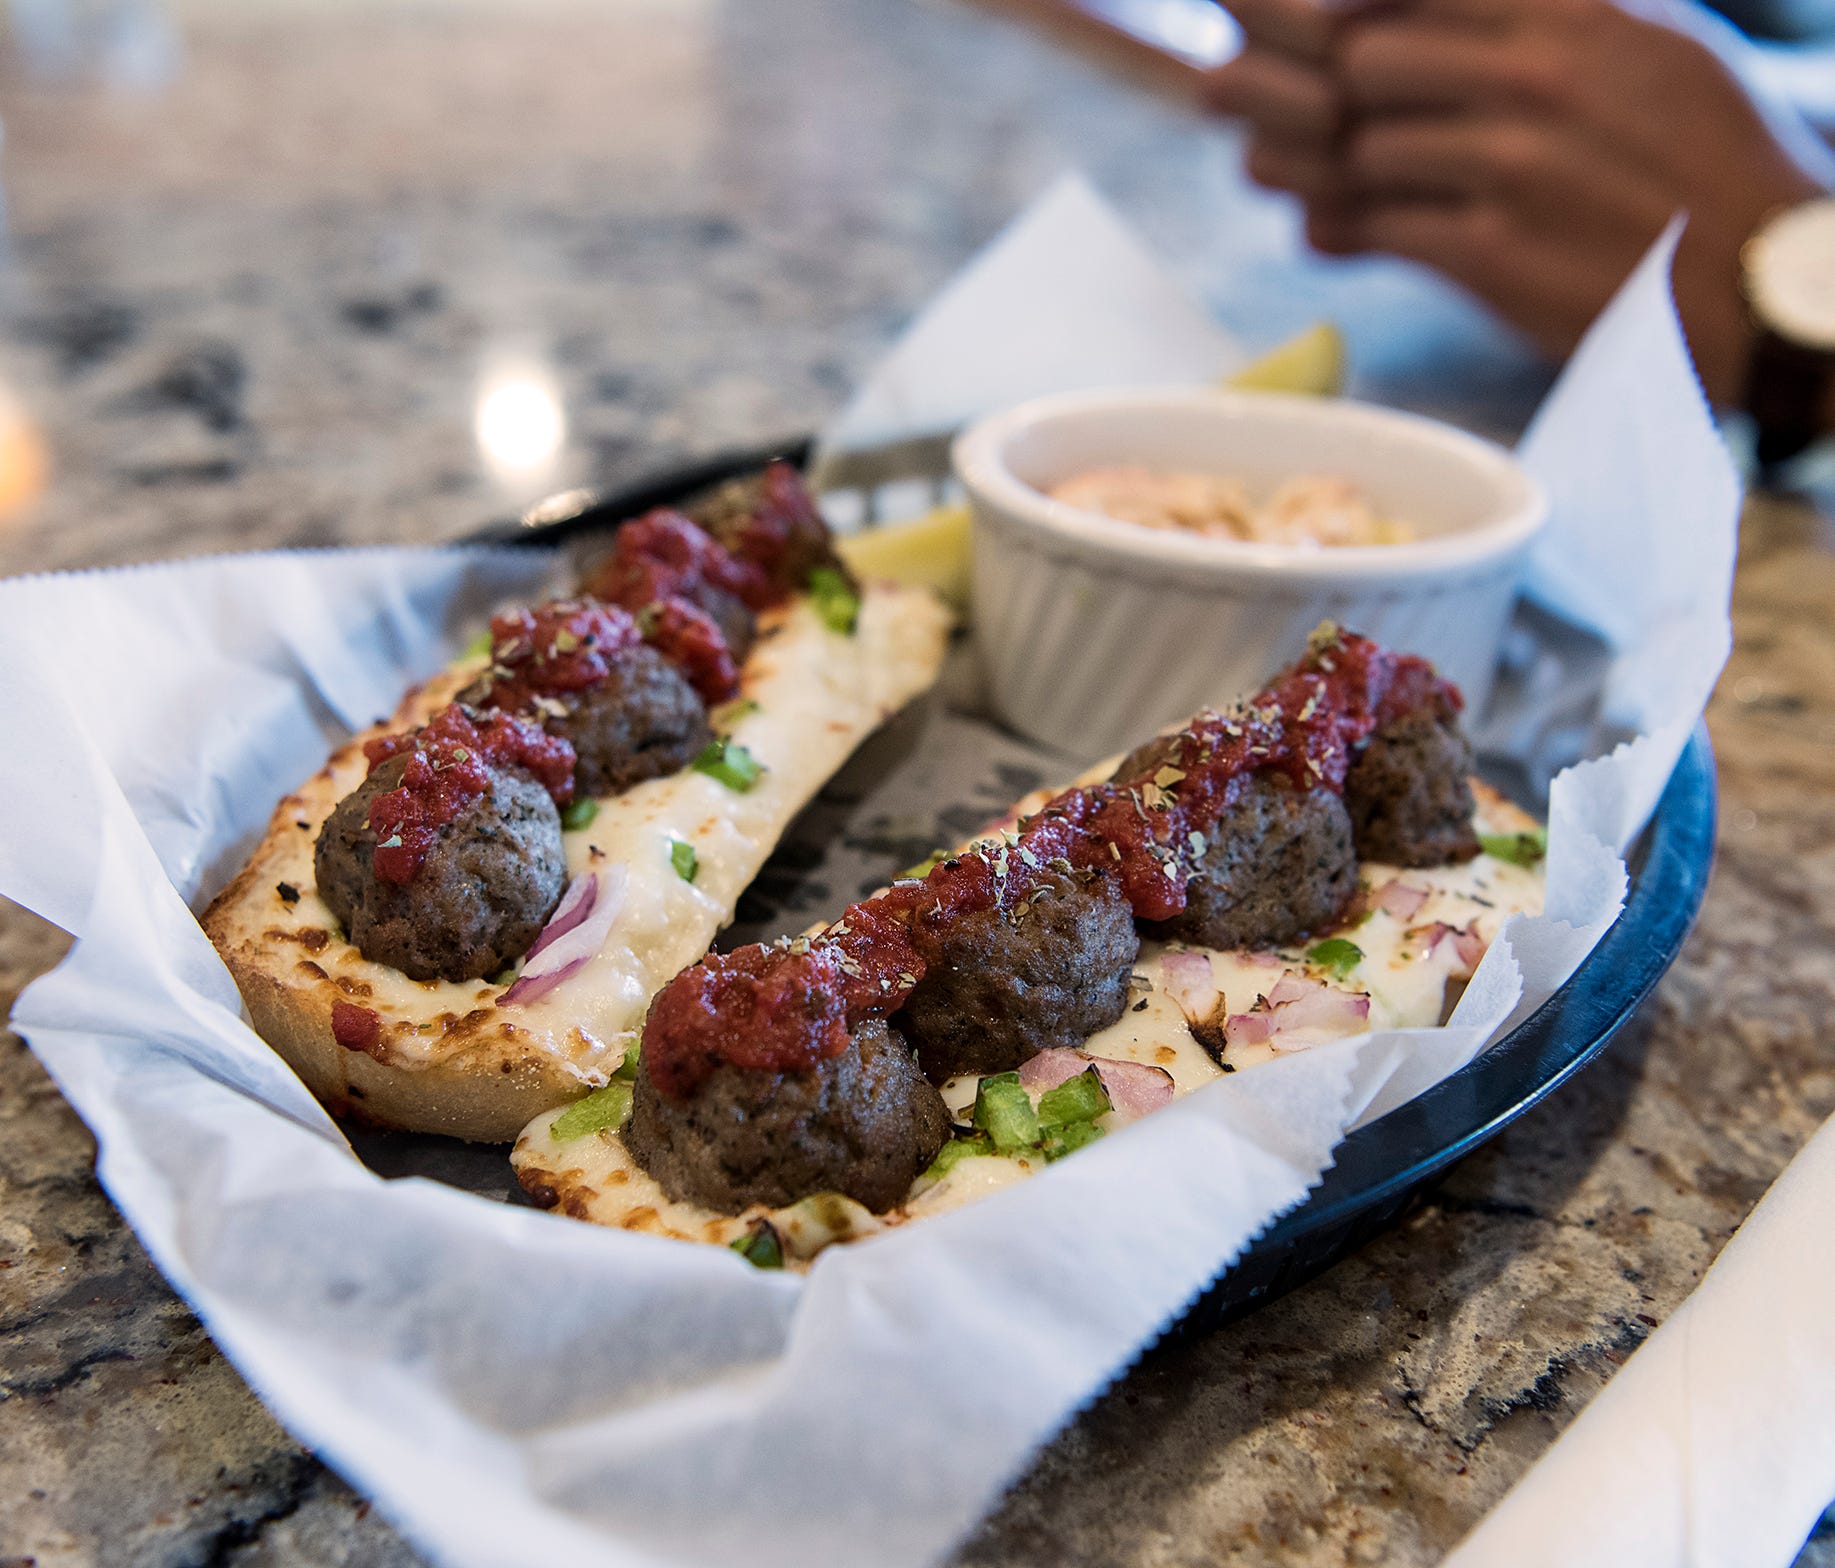 Jockamo's is well known for its ingenious pizzas such as the Slaughterhouse Five (named in honor of Indy author Kurt Vonnegut), which is topped with pepperoni, ham, sausage, bacon and steak. The meaty meatball sub ($8.50) comes with eight hand-rolled